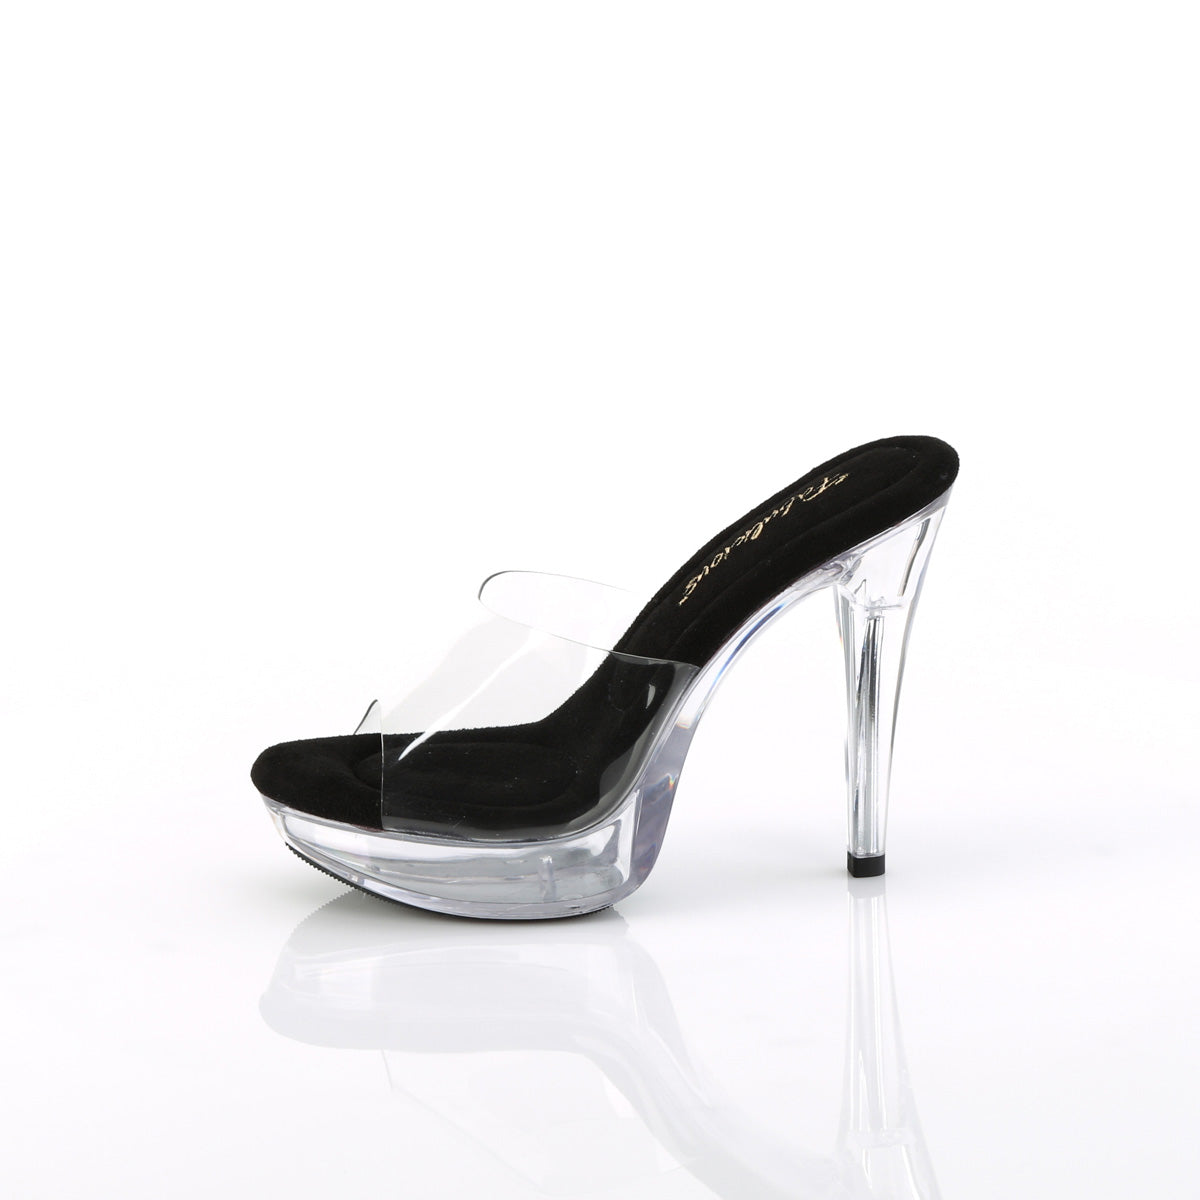 COCKTAIL-501 Fabulicious Clear-Black/Clear Shoes [Sexy Shoes]